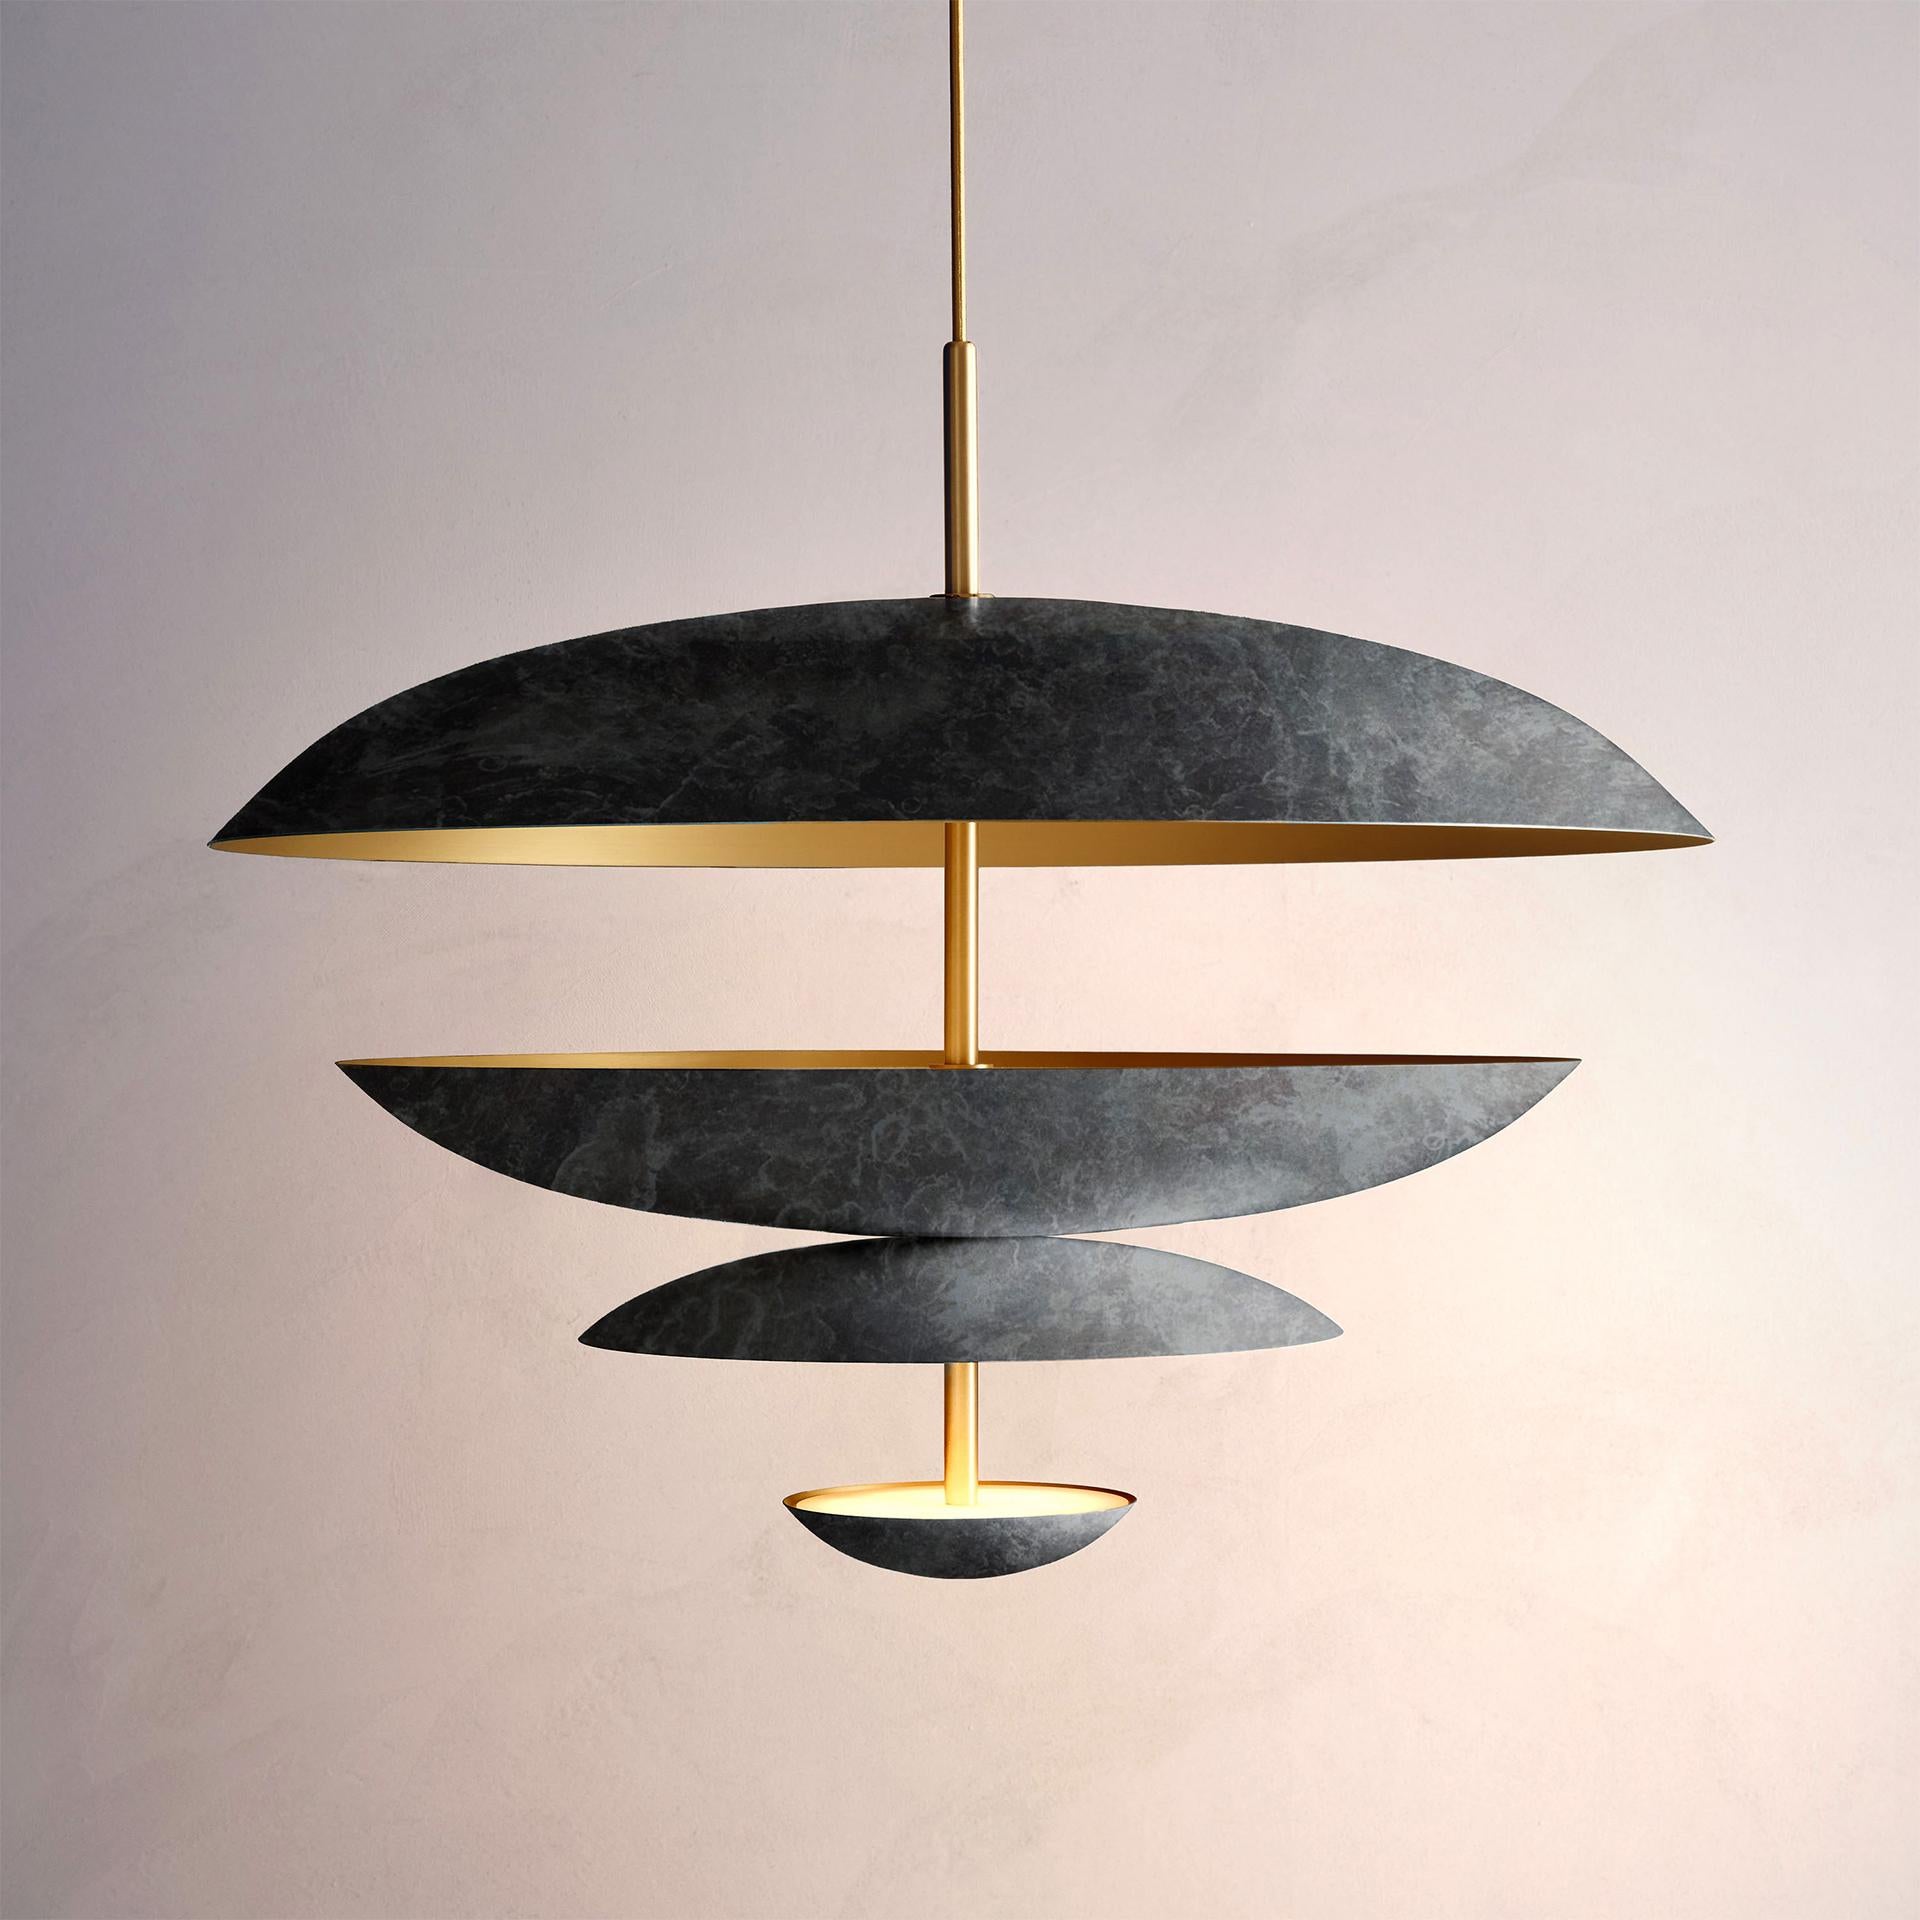 Inspired by planet-like shapes and textures, the Cosmic collection plays with both metal properties and a selection of patina finishes. The Callisto Chandelier is inspired by the beautiful textures found within nature. A mixed callisto patina is